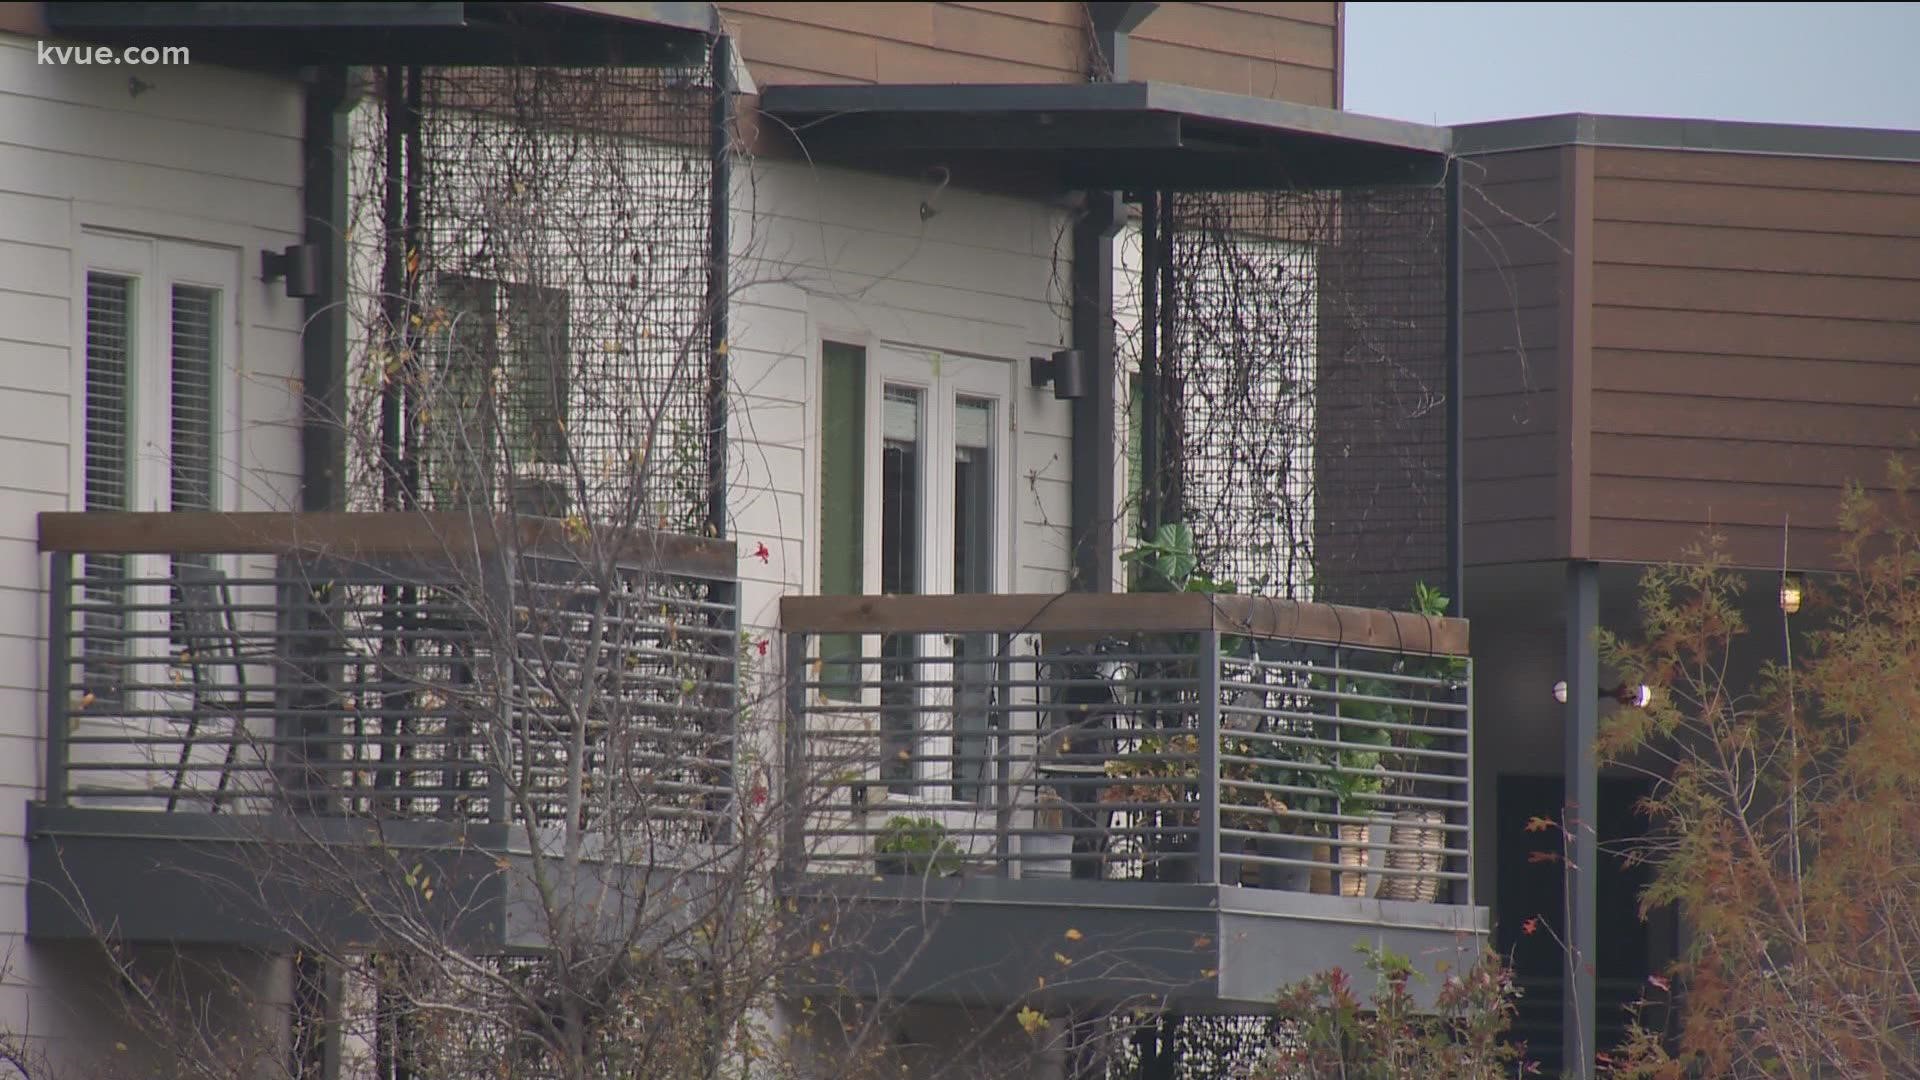 Renting an apartment in Austin has gotten more expensive. KVUE spoke with rental experts about what we can expect in 2022.